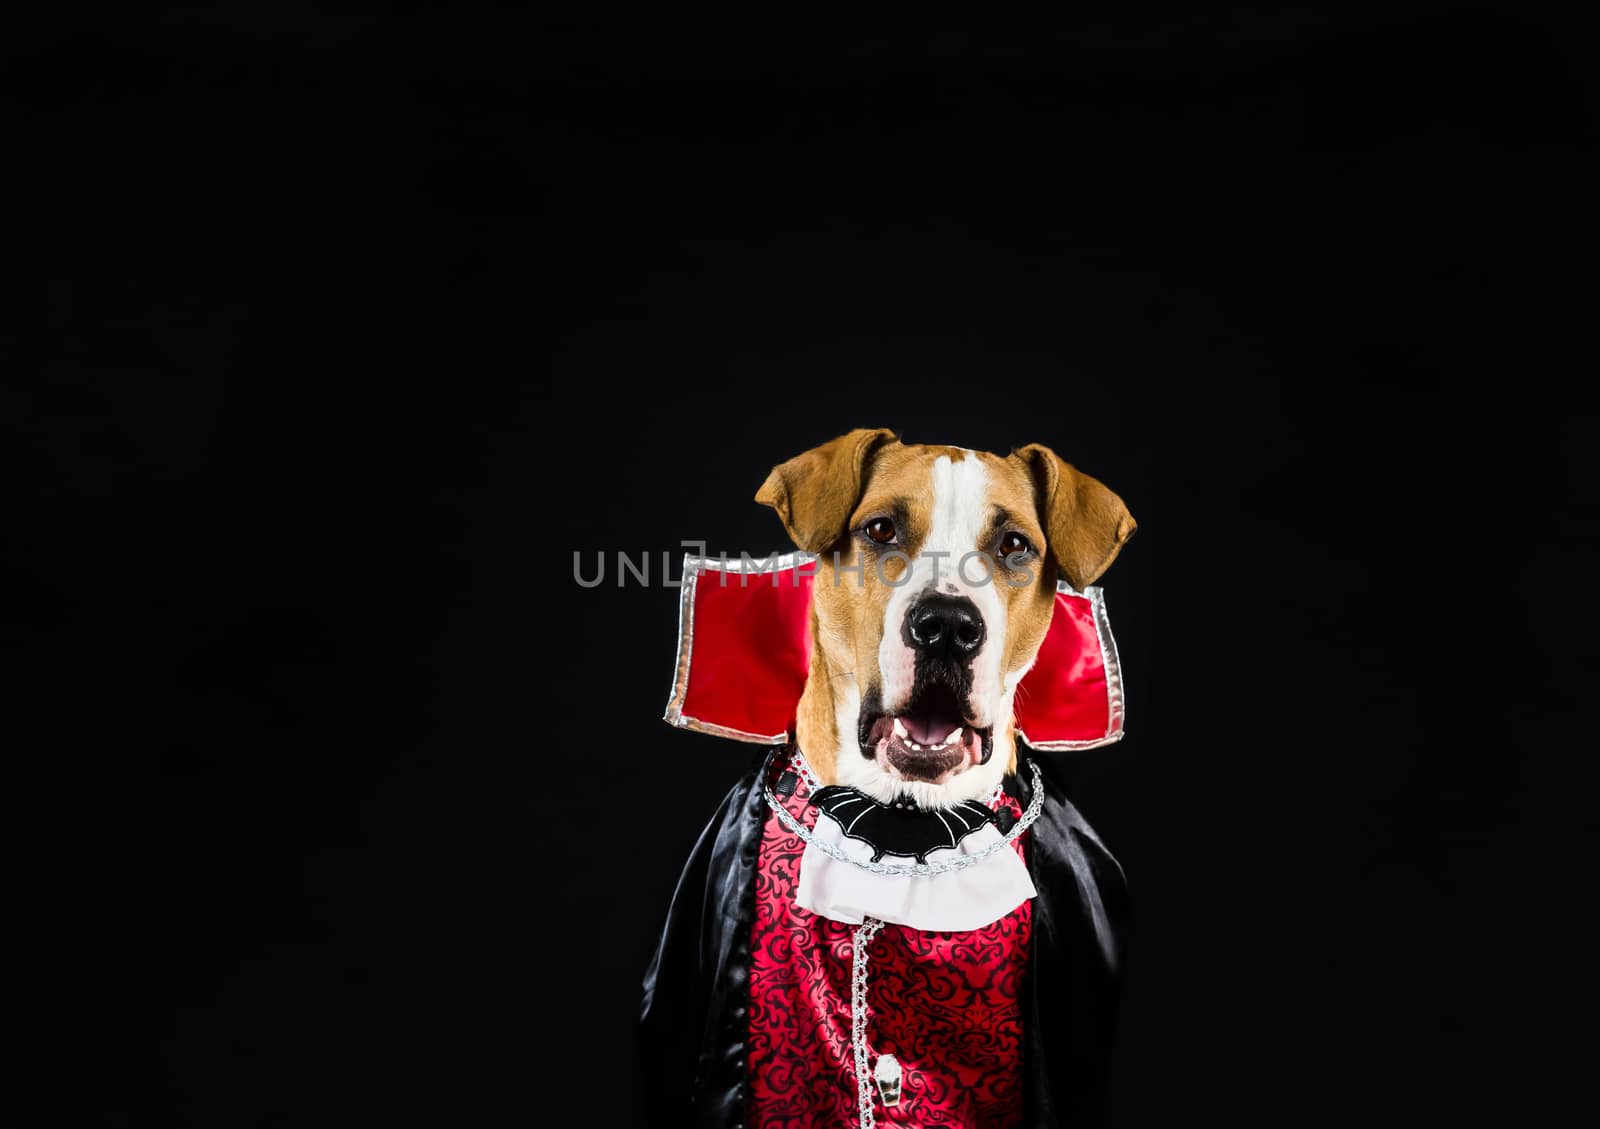 Dog in halloween costume by photoboyko